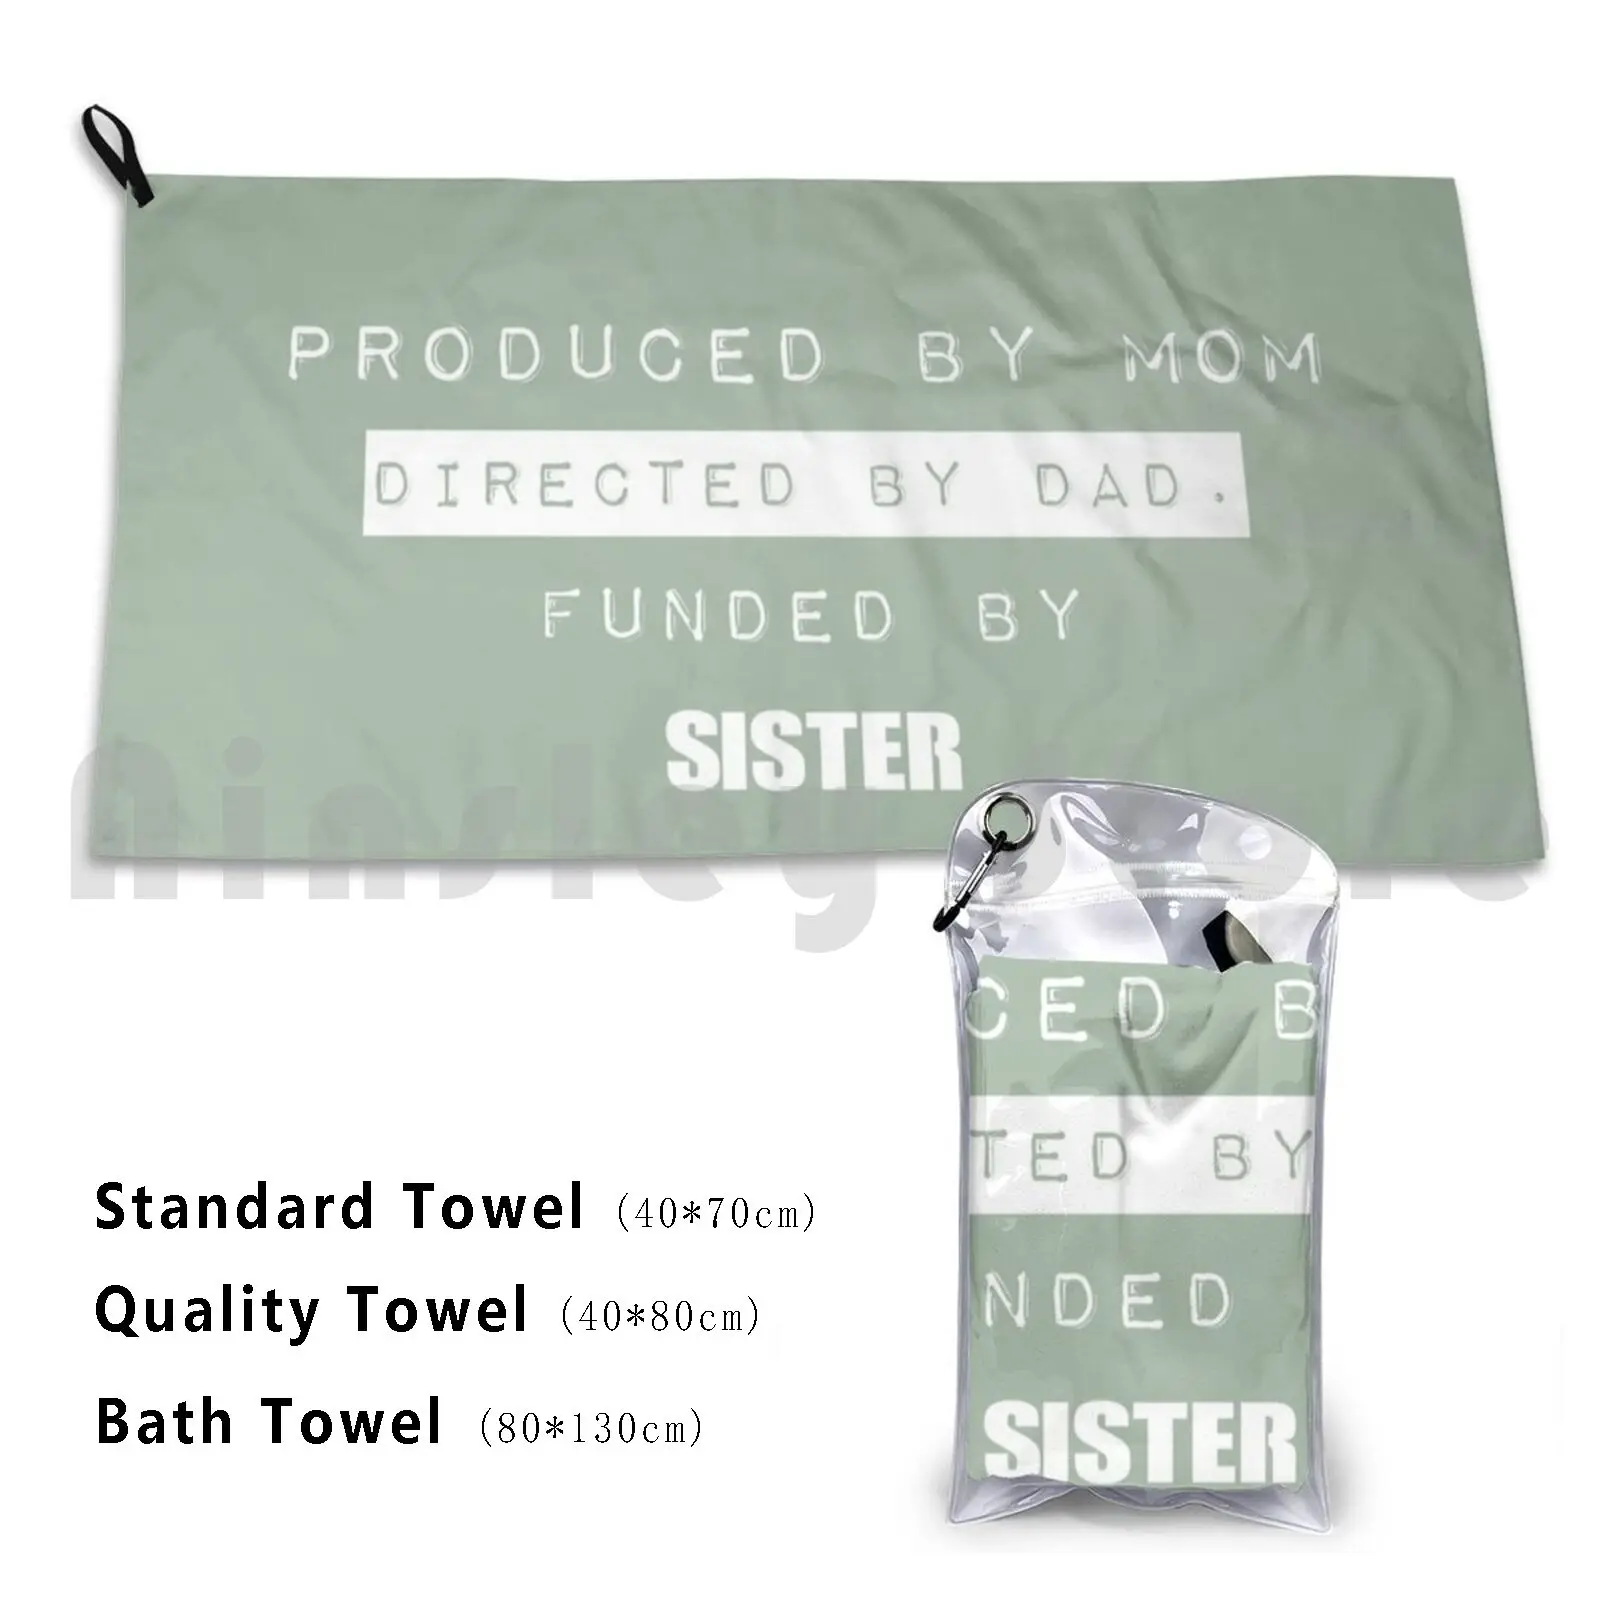 Produced By Mom Directed By Dad Funded By Sister Bath Towel Beach Cushion Produced By Mom Directed By Dad Funded